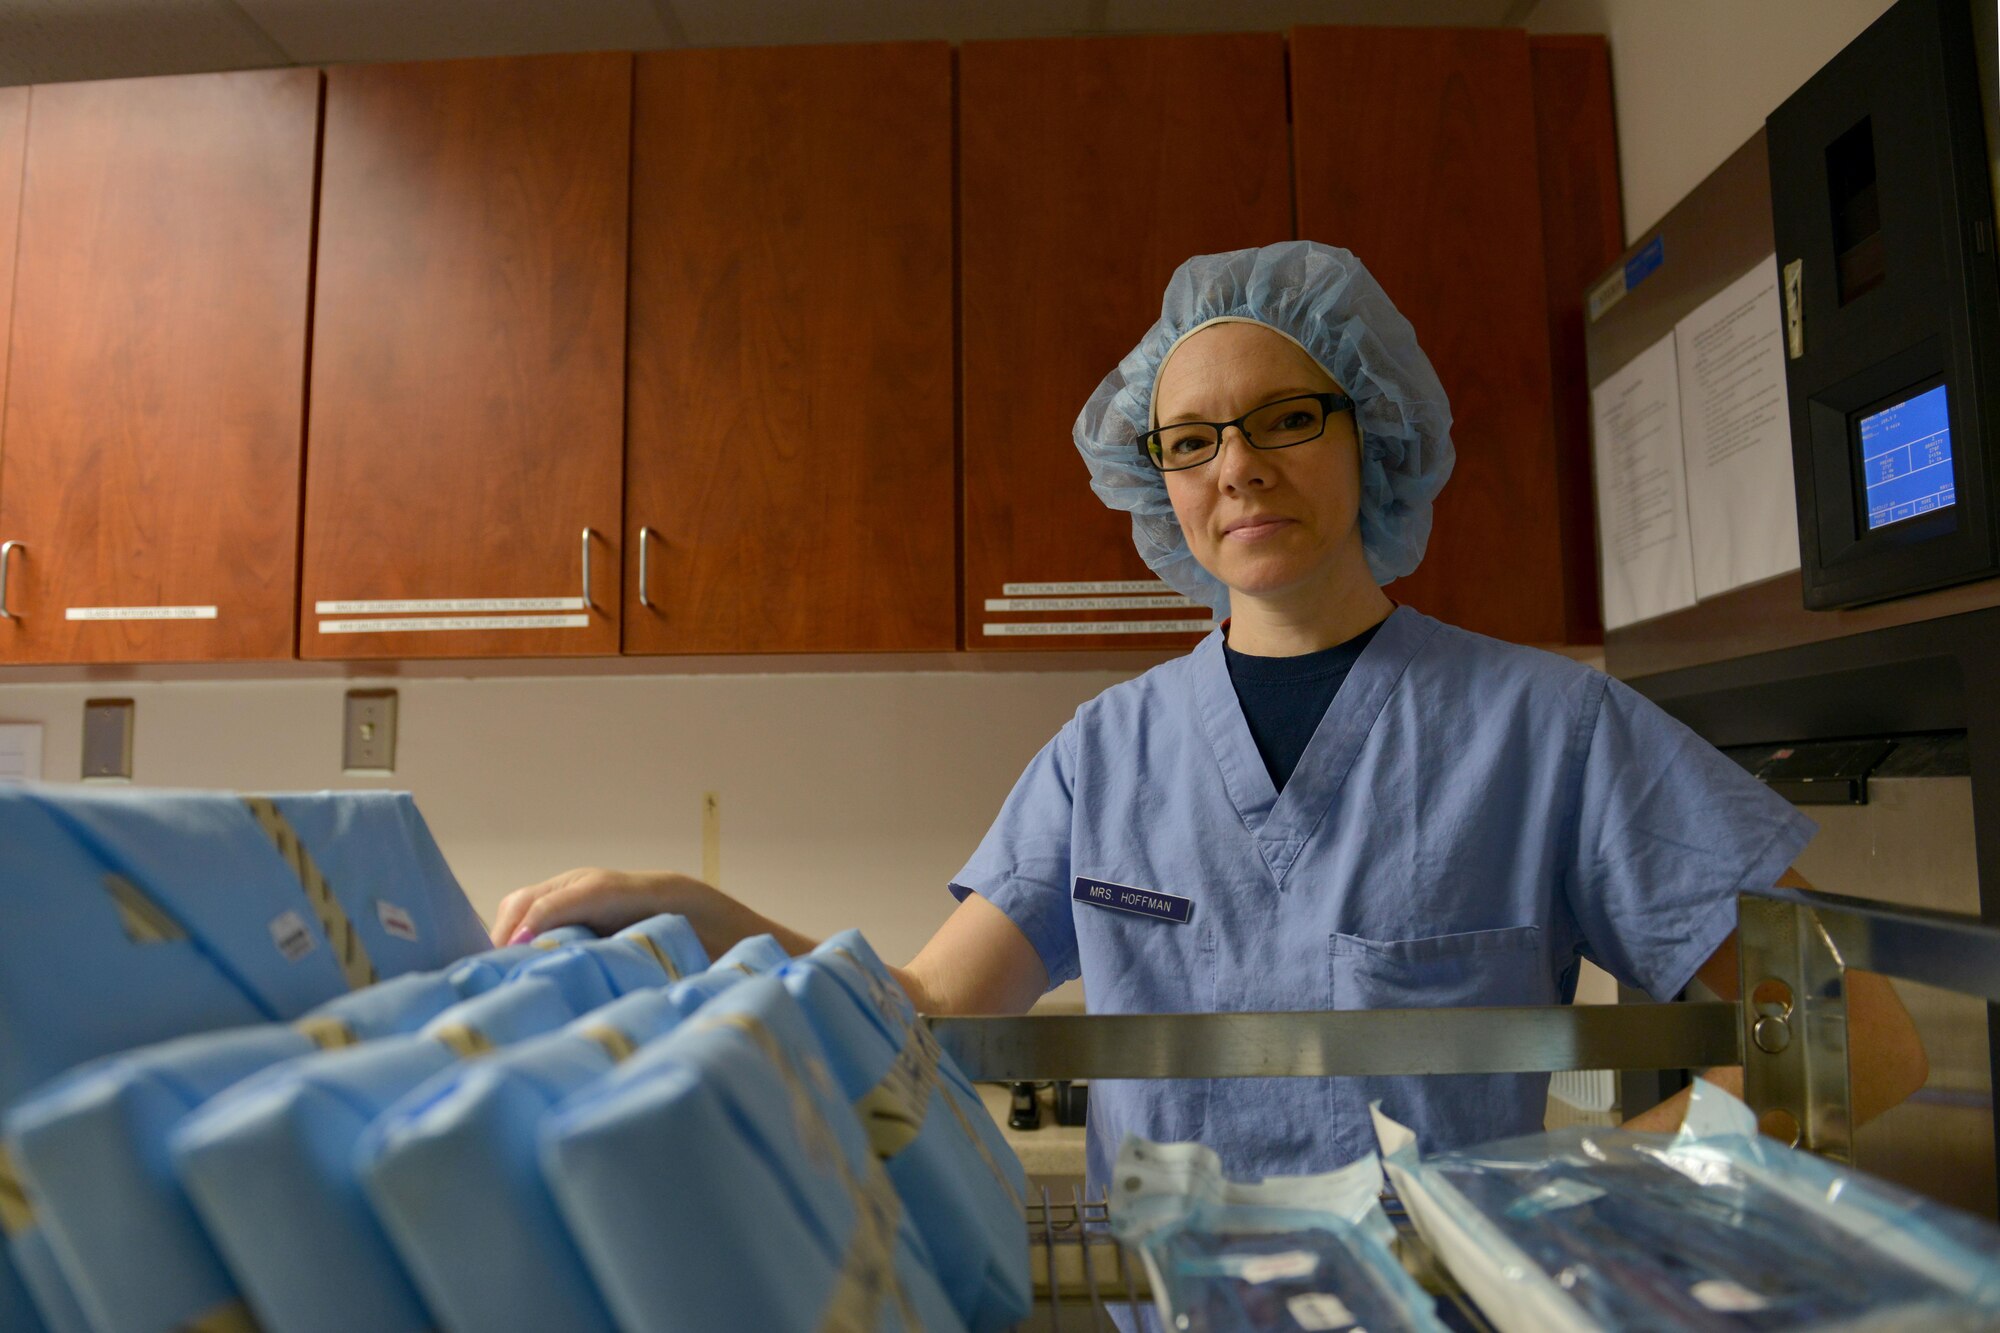 Janet Hoffman, 20th Dental Squadron centralized instrument processing center technician, stands for a picture at Shaw Air Force Base, S.C., May 18, 2017. Hoffman is responsible for sterilizing more than 14,000 20th Medical Group instruments, maintaining patient safety by eliminating the spread of bacteria. (U.S. Air Force photo by Airman 1st Class Destinee Sweeney)